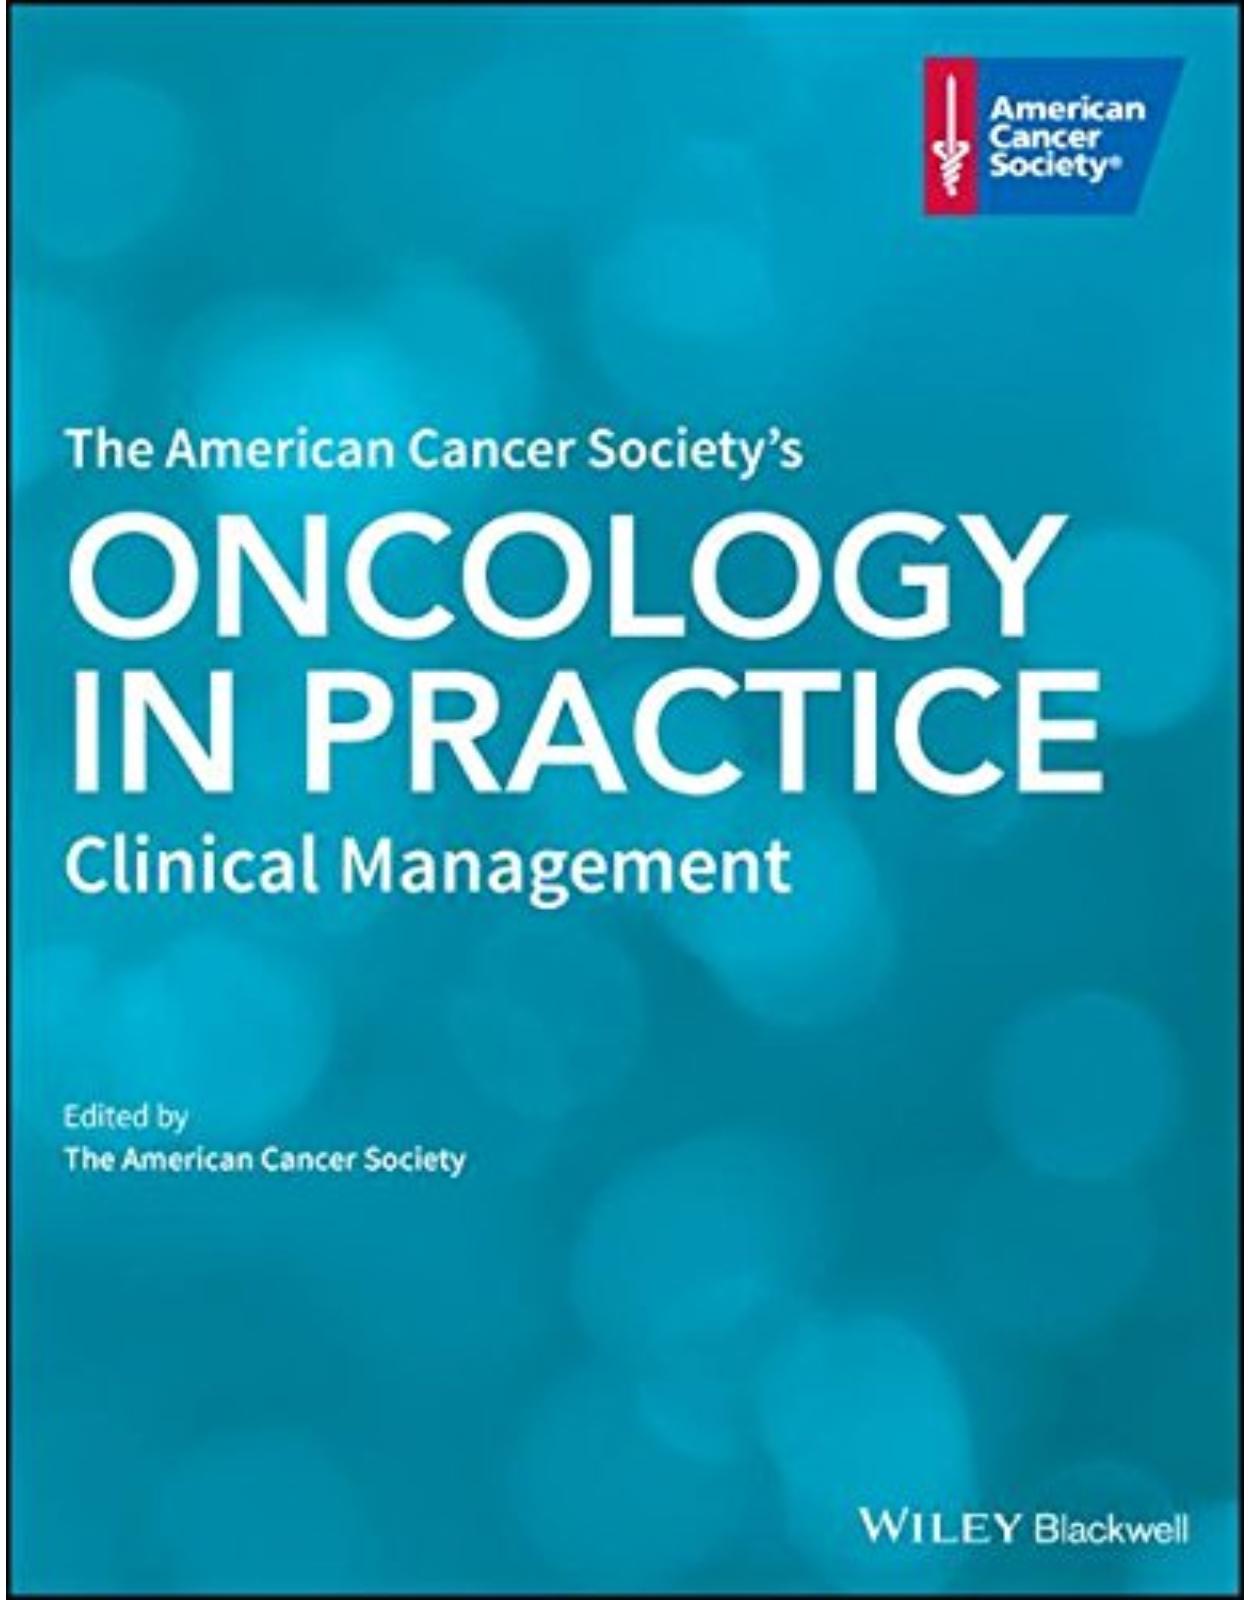 The American Cancer Society’s Oncology in Practice: Clinical Management